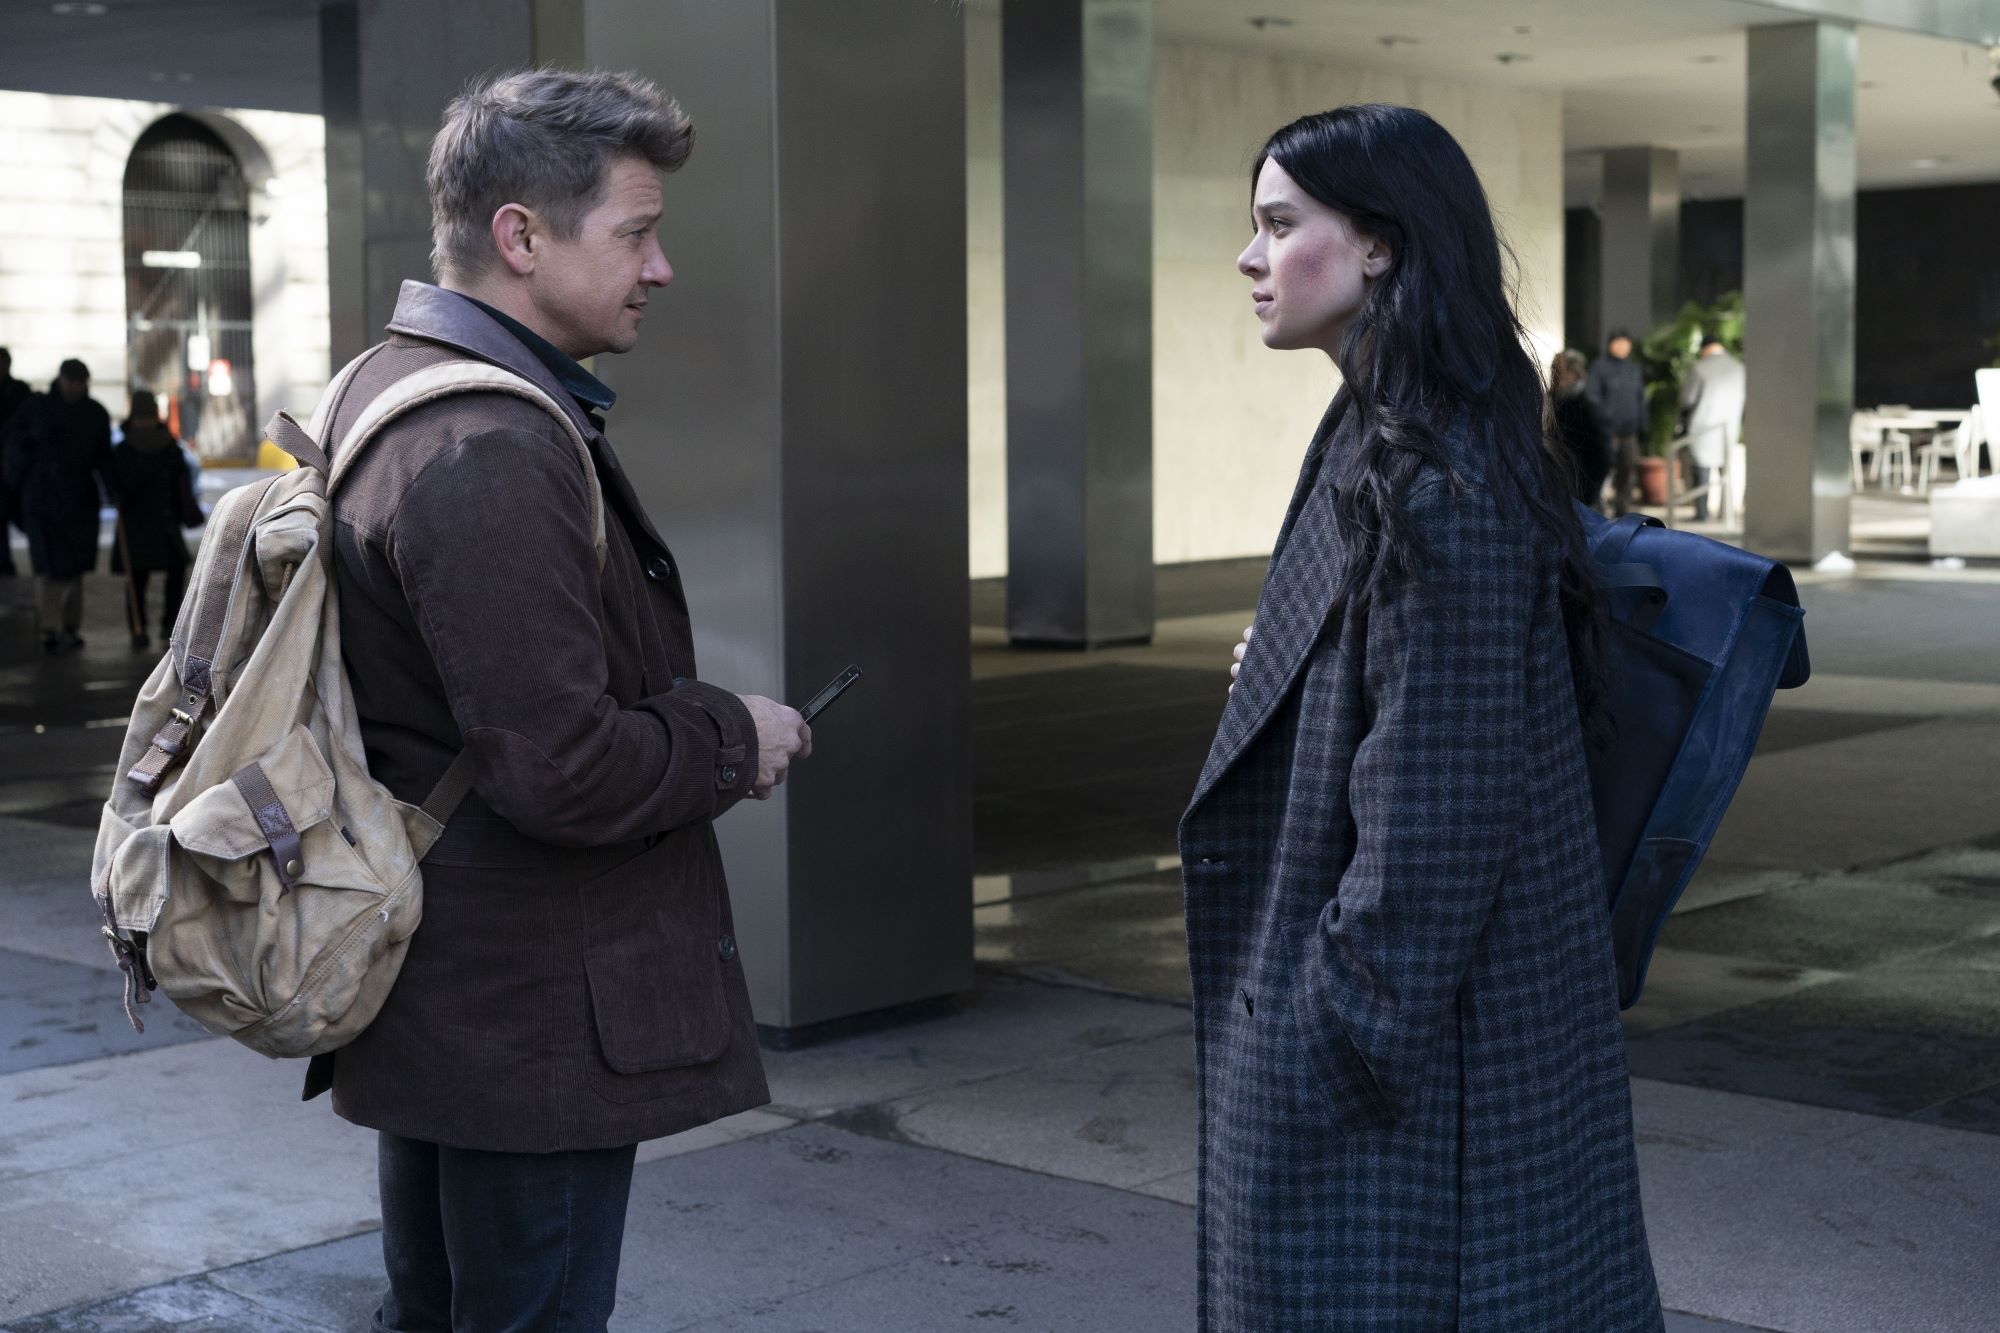 'Hawkeye' Episode 4 stars Jeremy Renner and Hailee Steinfeld, in character as Clint Barton and Kate Bishop, stand outside of a building. Clint wears a brown coat over black pants and has a tan backpack slung over his shoulders. Kate wears a dark gray plaid coat and has a black bag slung over her shoulder. Renner also starred in 'Avengers: Endgame.'